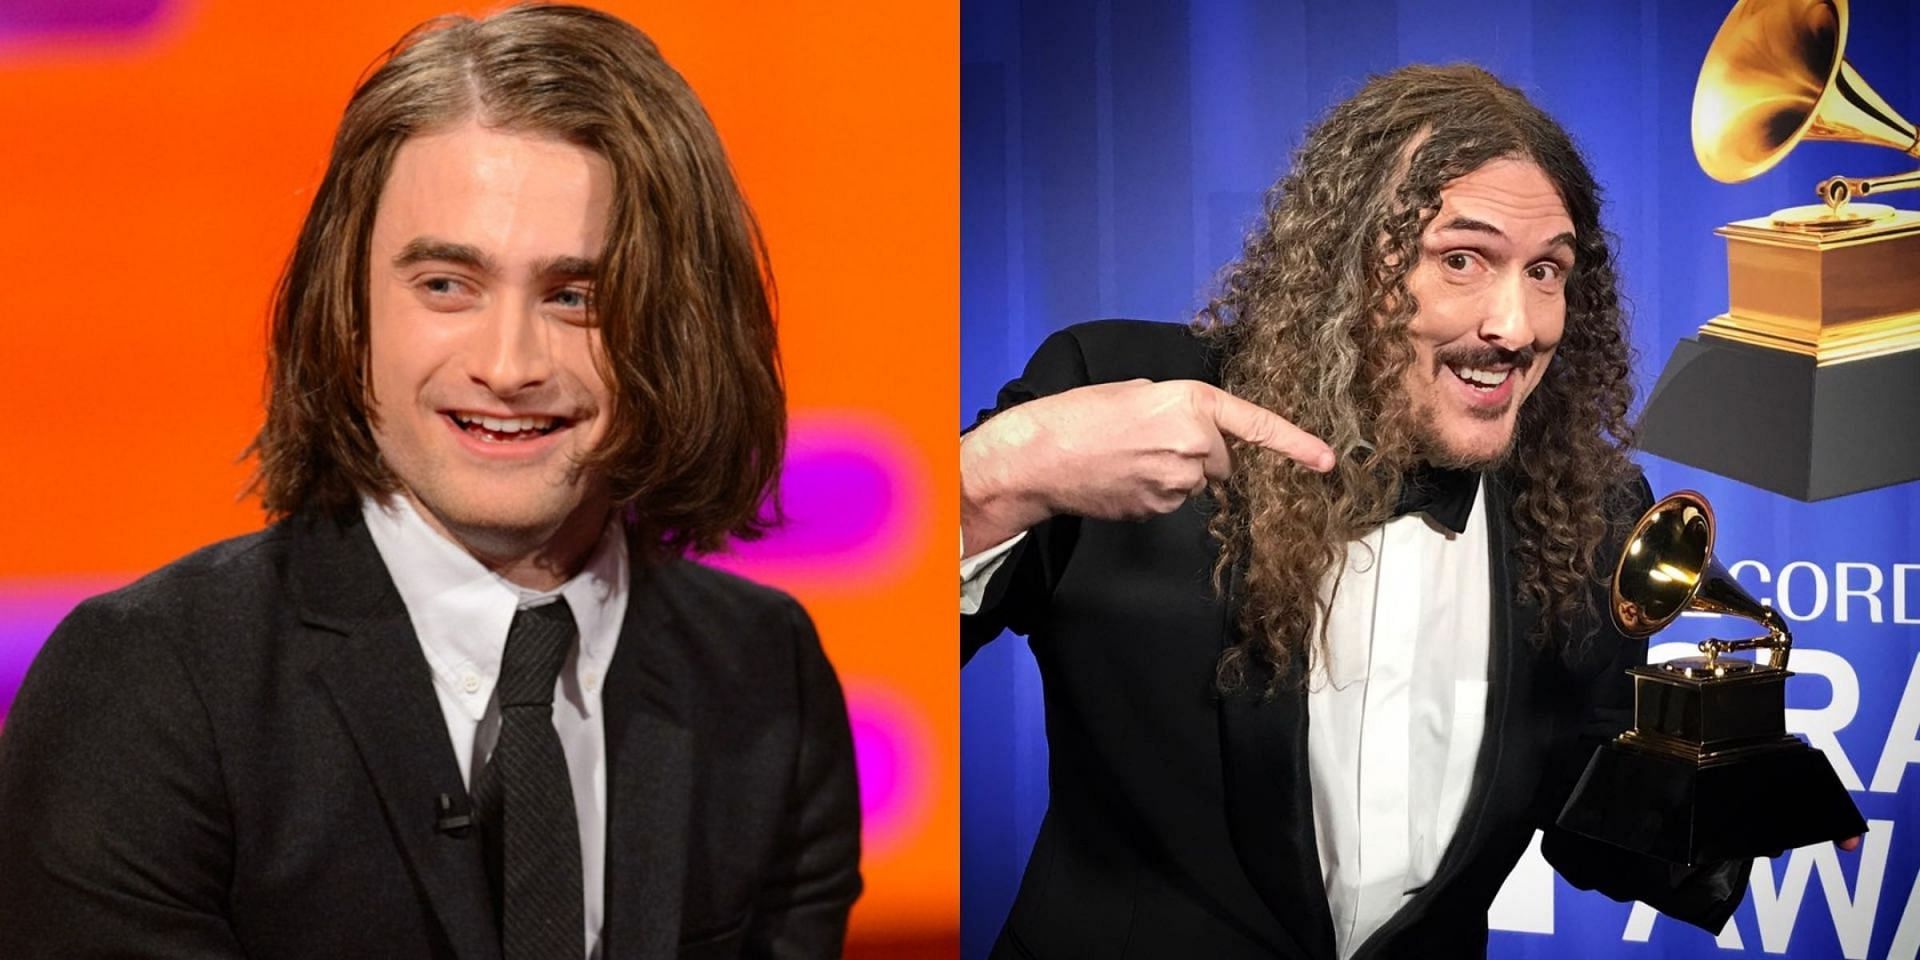 Daniel Radcliffe and &quot;Weird Al&quot; Yankovic (Image via The Graham Norton Show/BBC, and weirdal/Facebook)